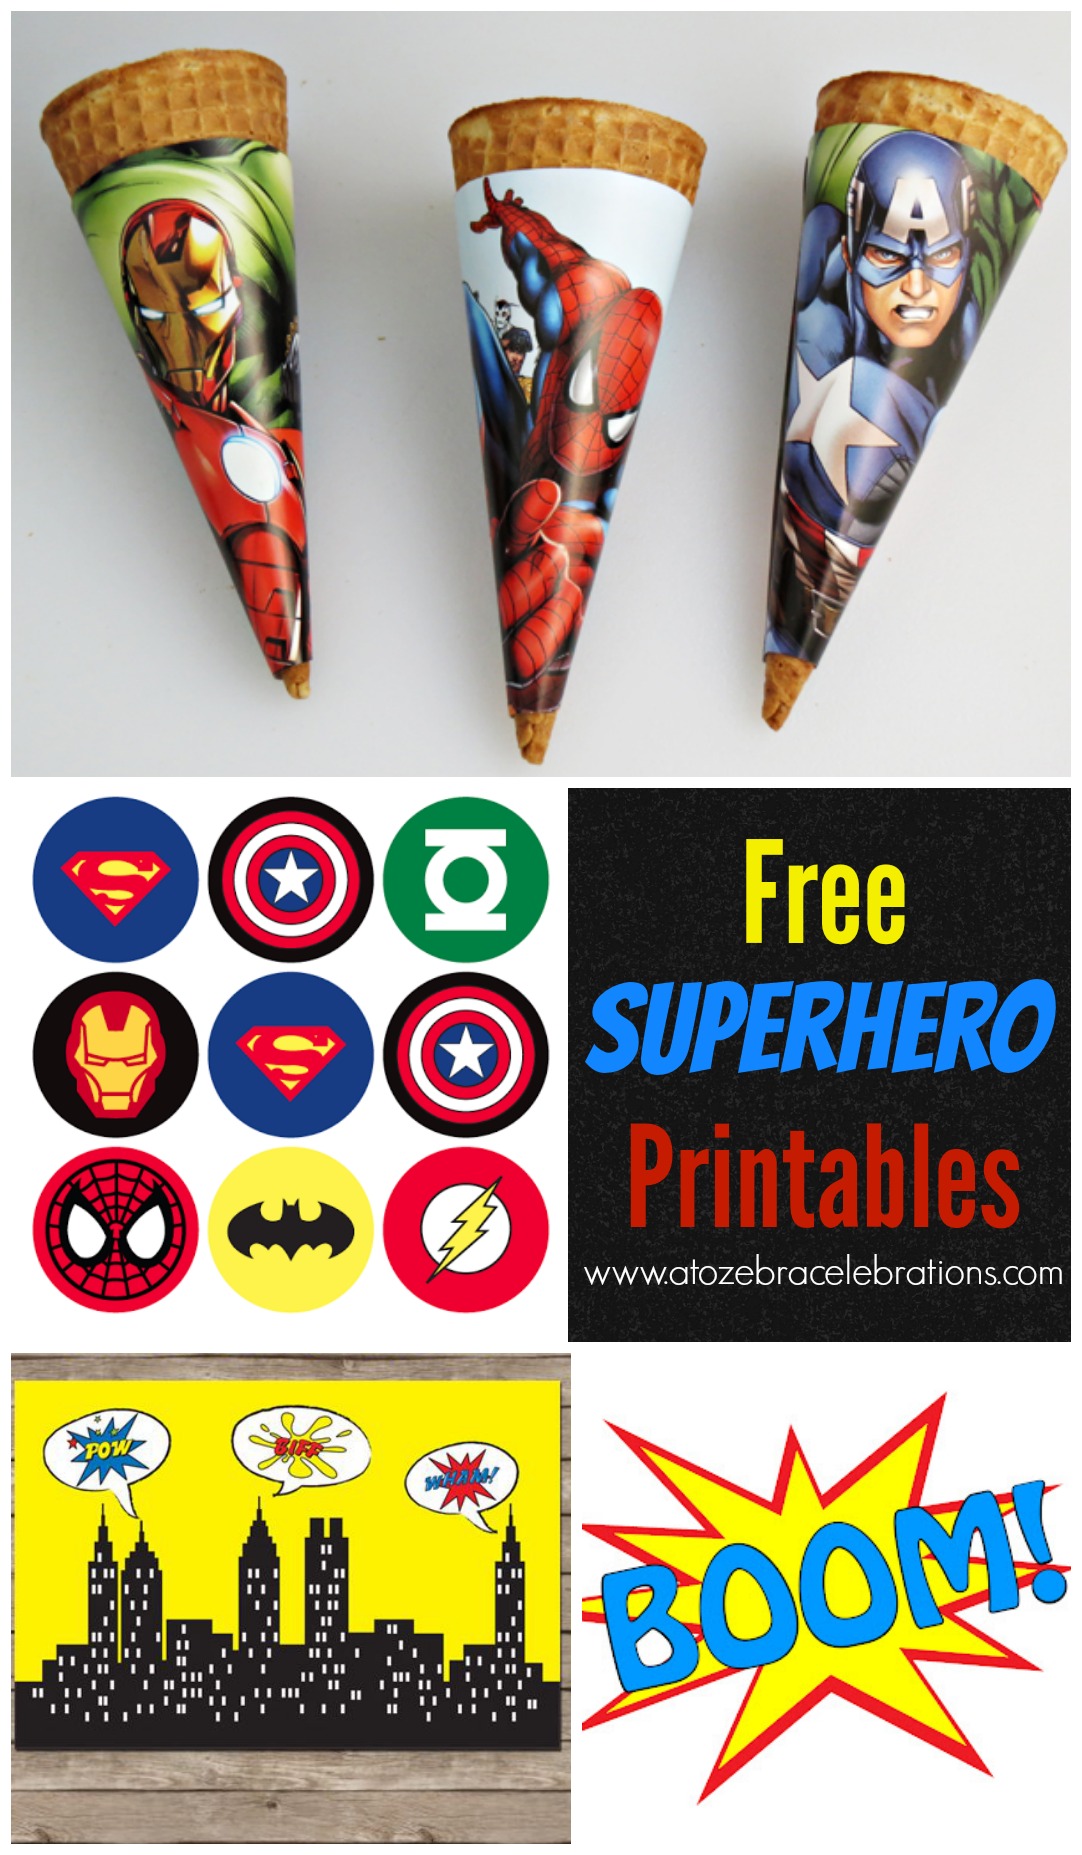 6-best-images-of-superhero-birthday-party-free-printables-free